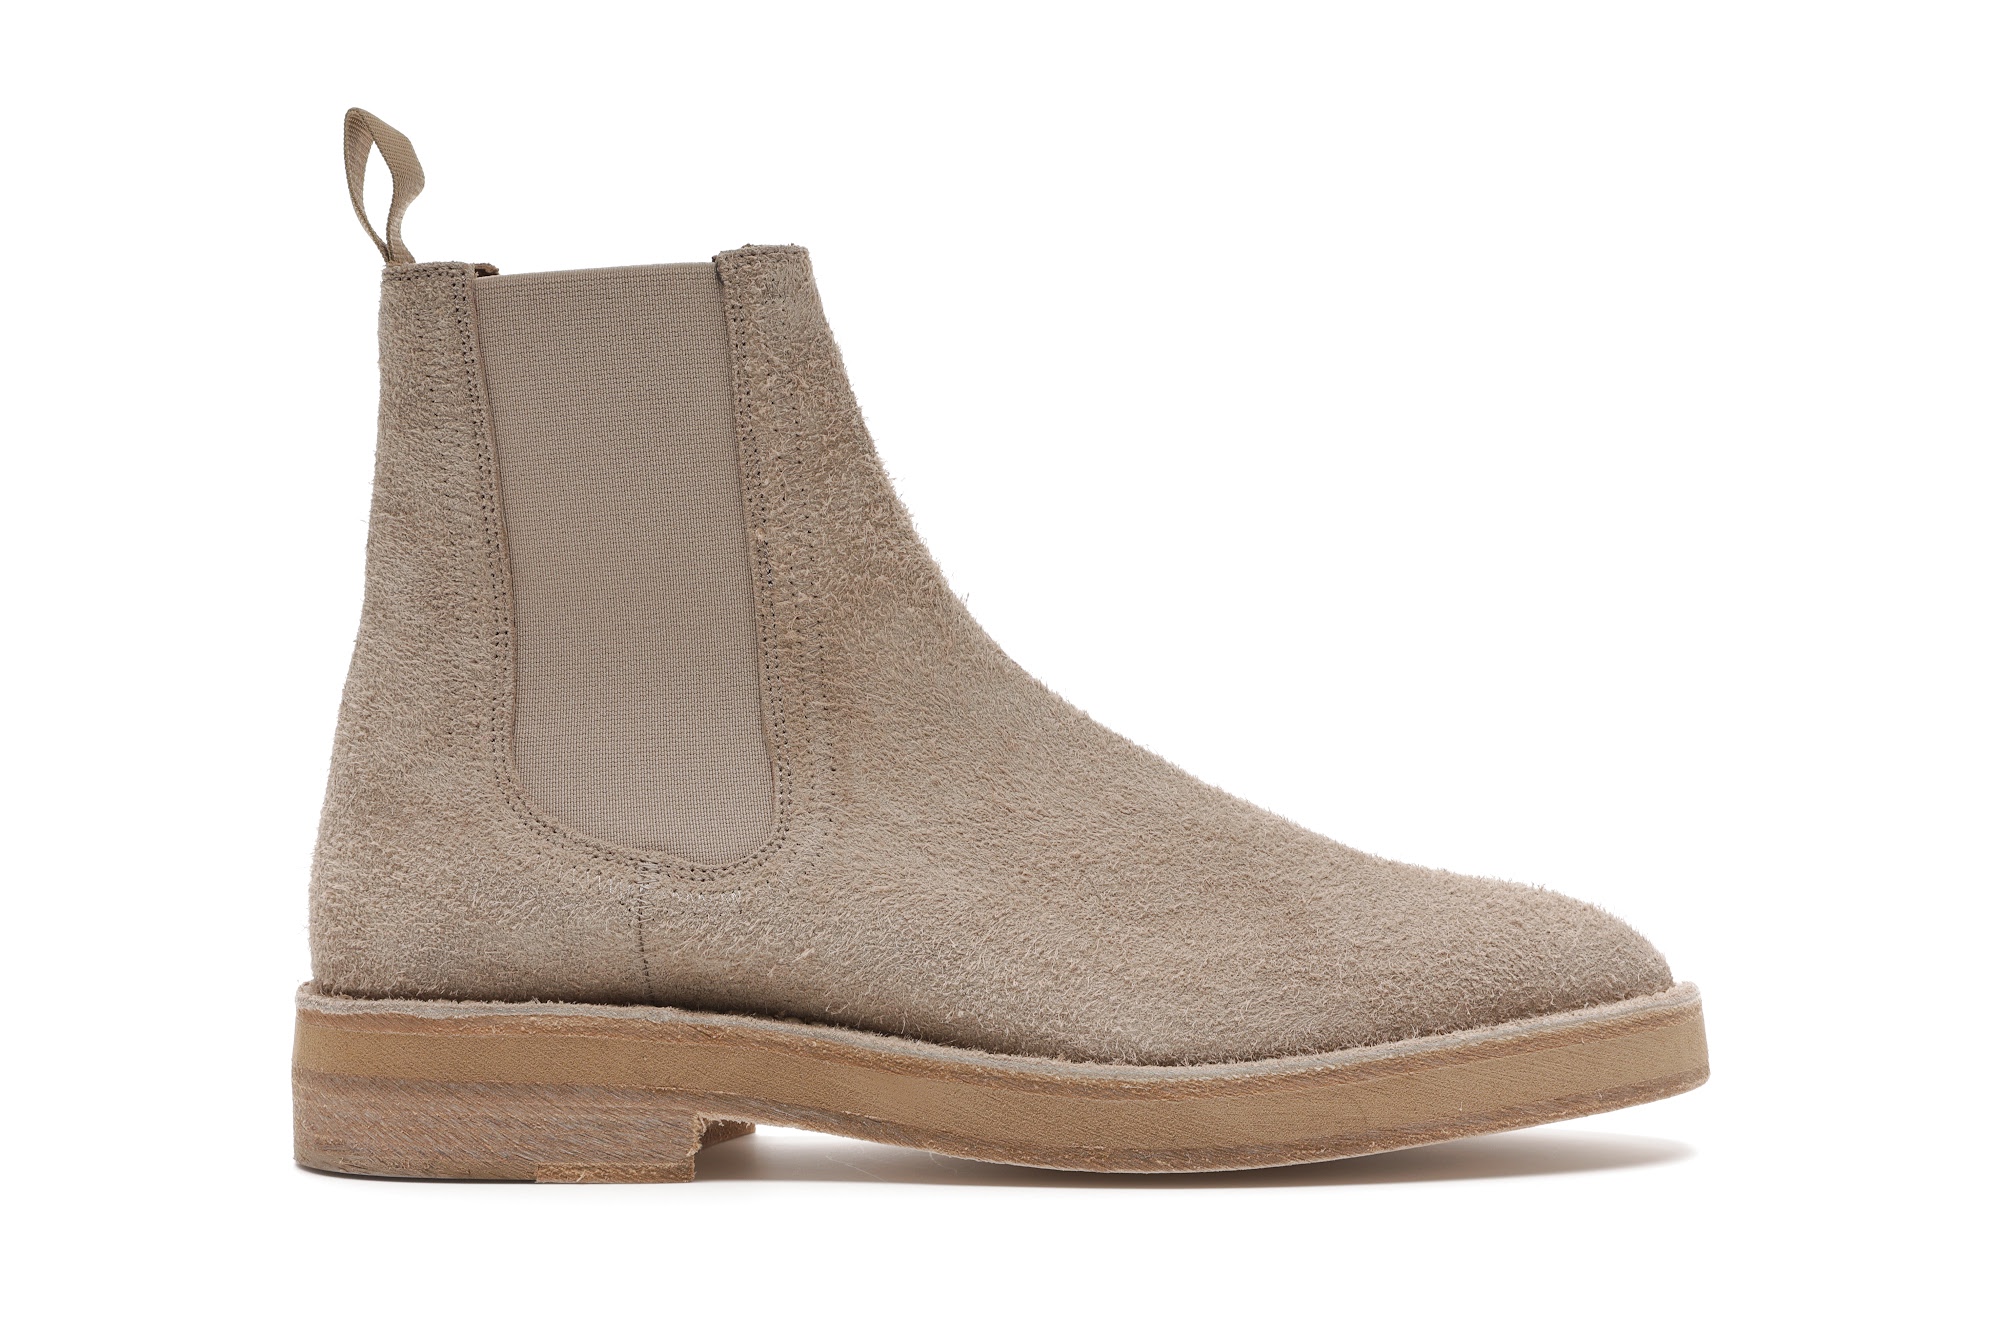 Yeezy Chelsea Boot Thick Shaggy Suede Taupe メンズ - KM5005.038 - JP